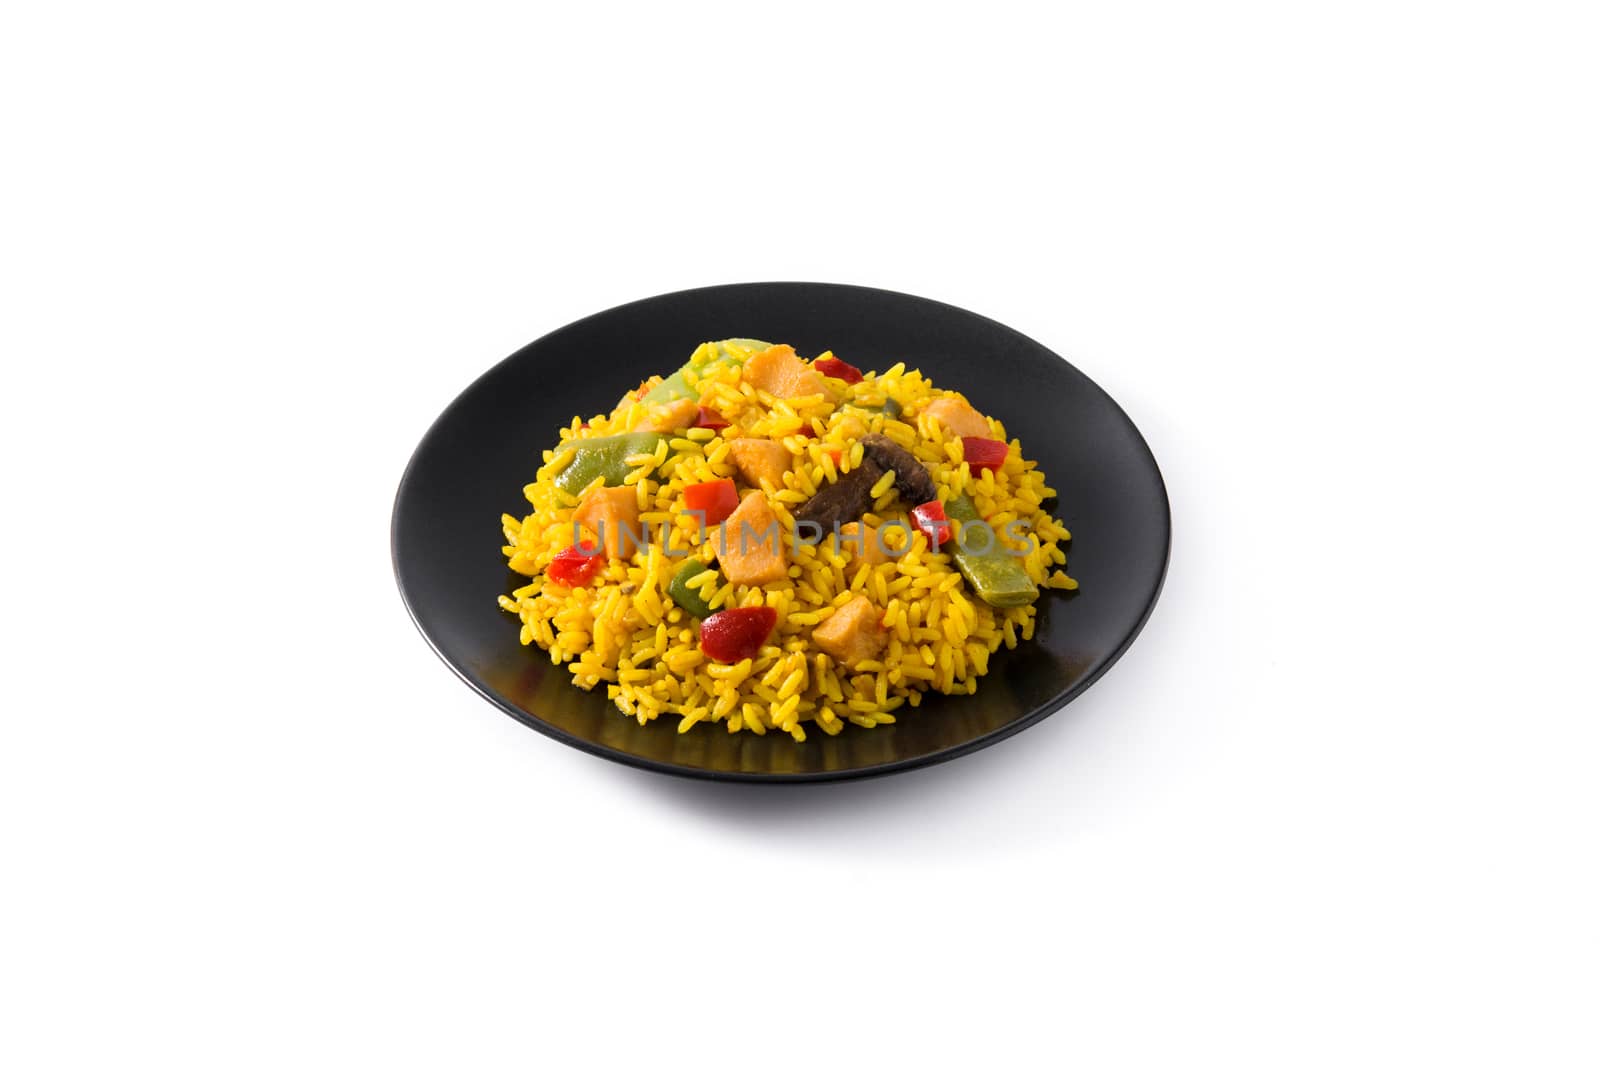 Fried rice with chicken and vegetables on black plate  by chandlervid85